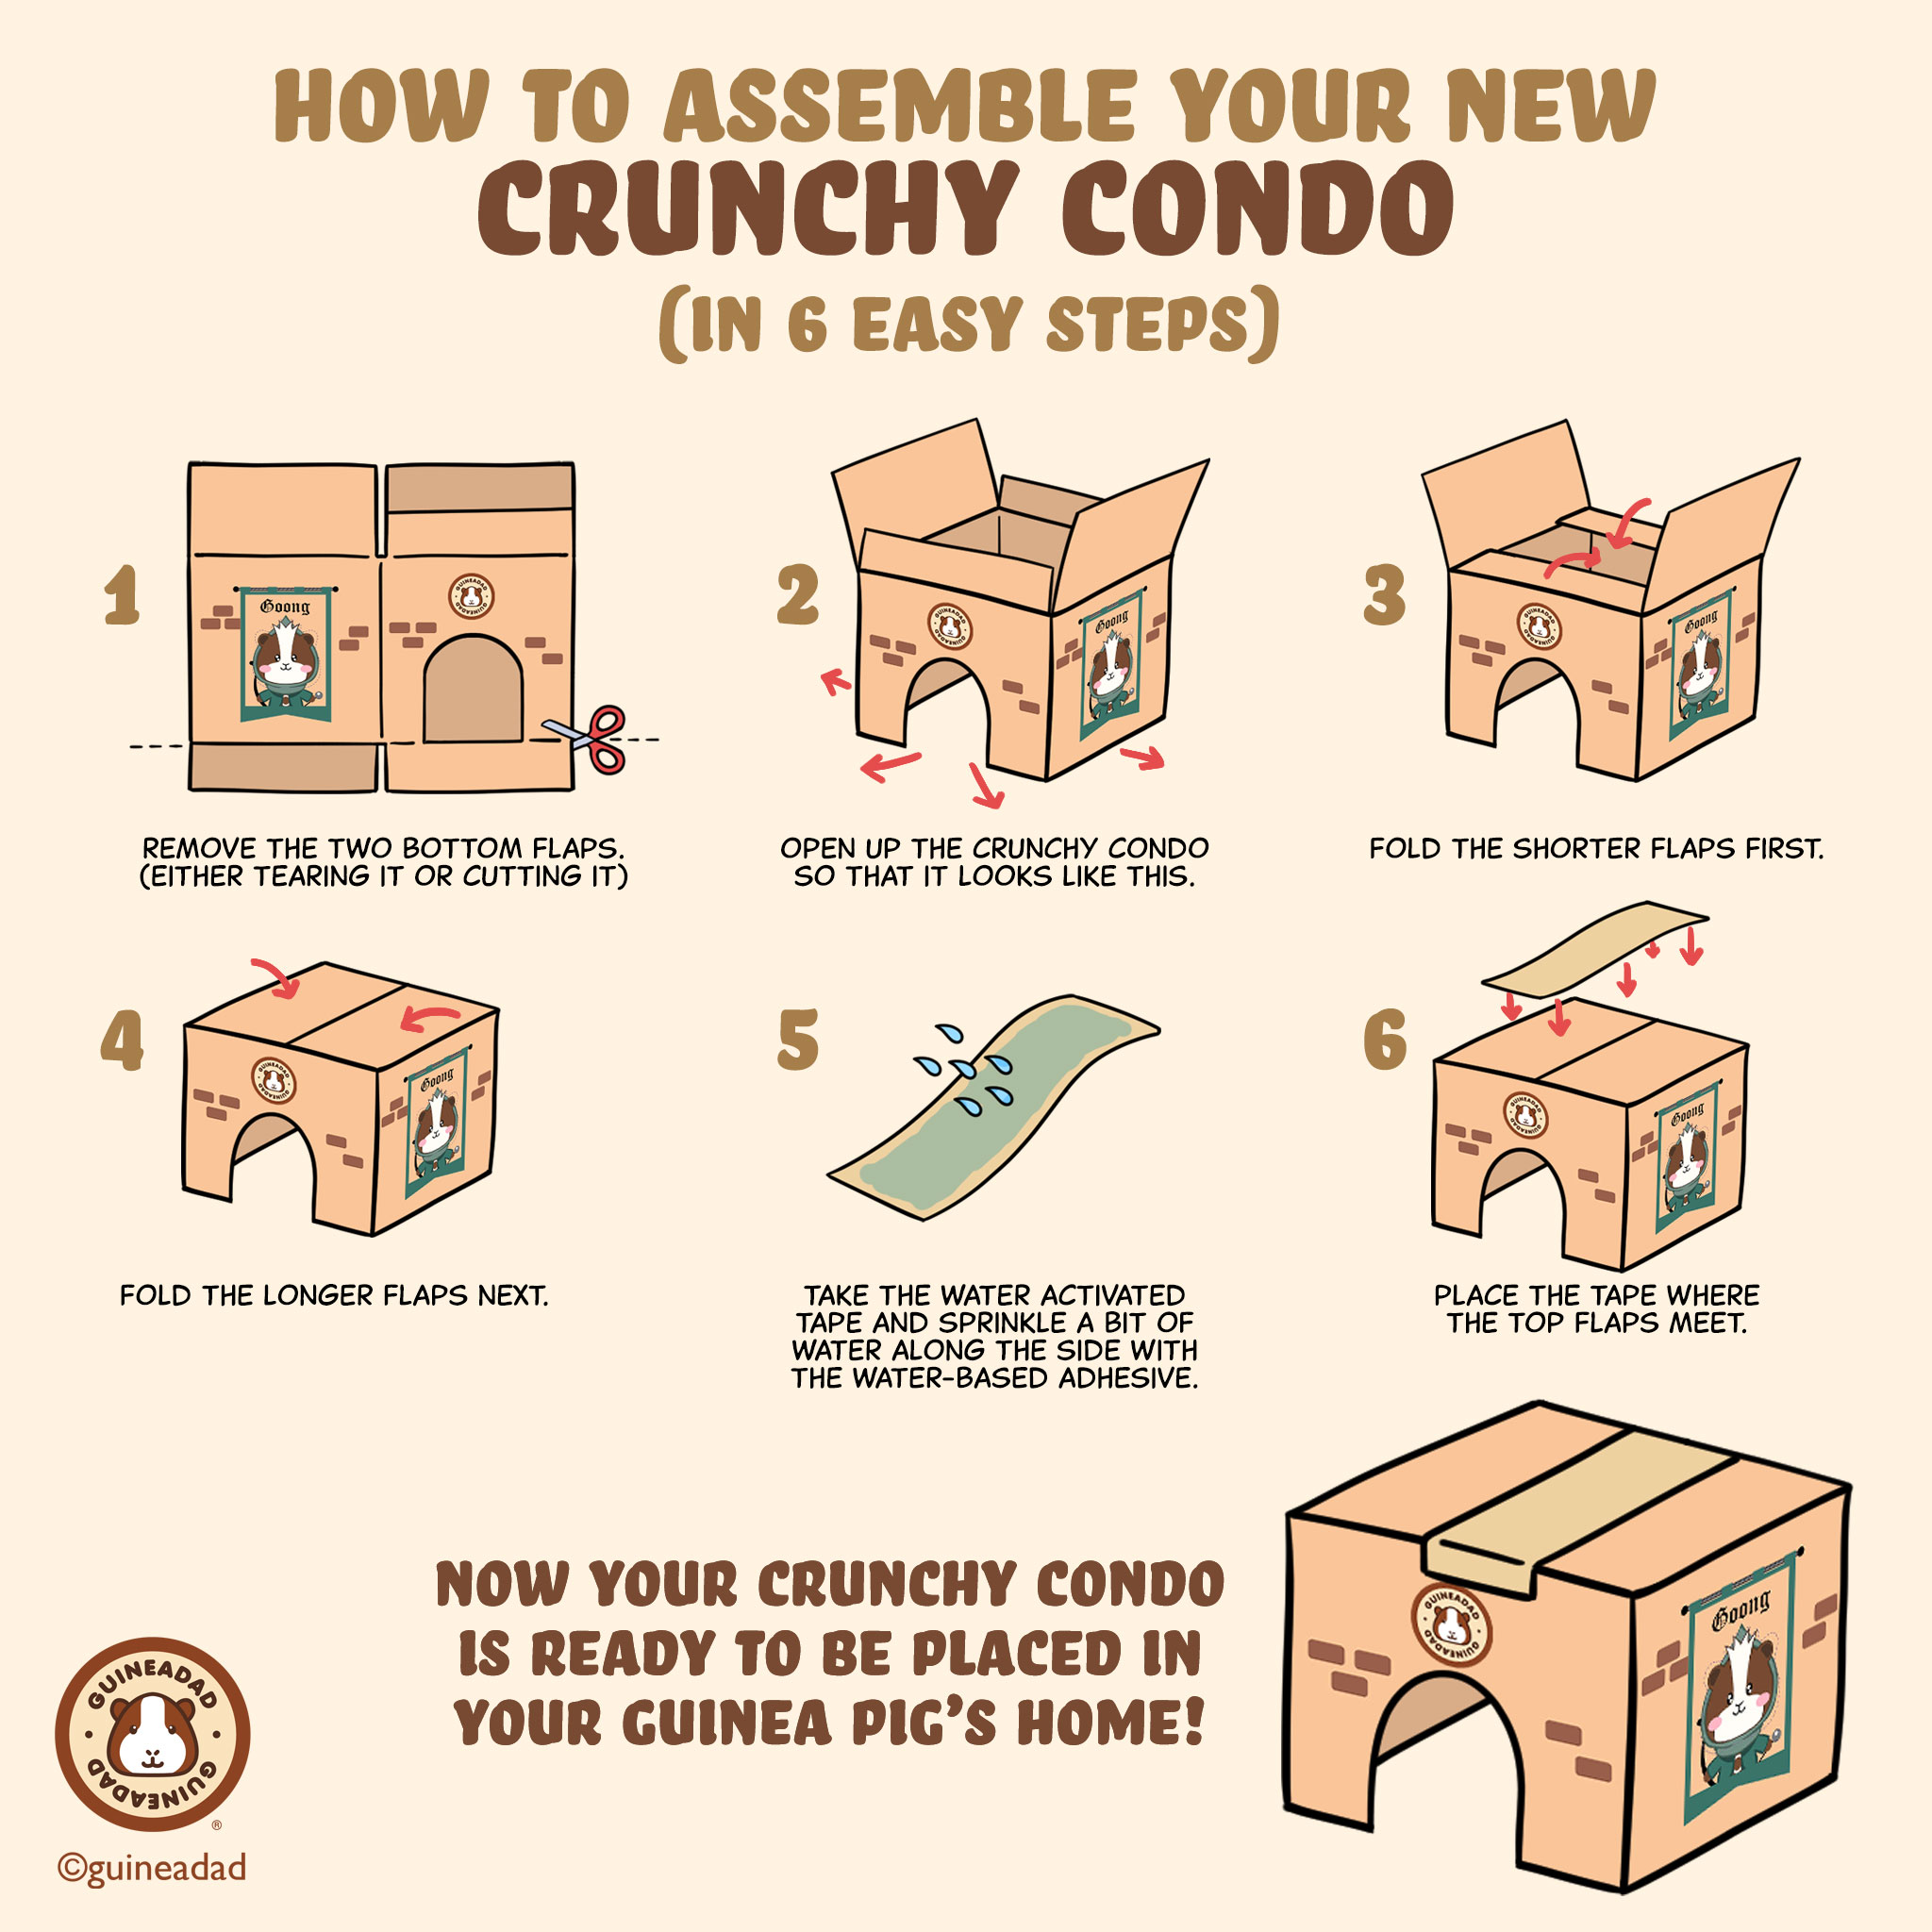 how-to-assemble-crunchy-condo-in-6-steps.jpg